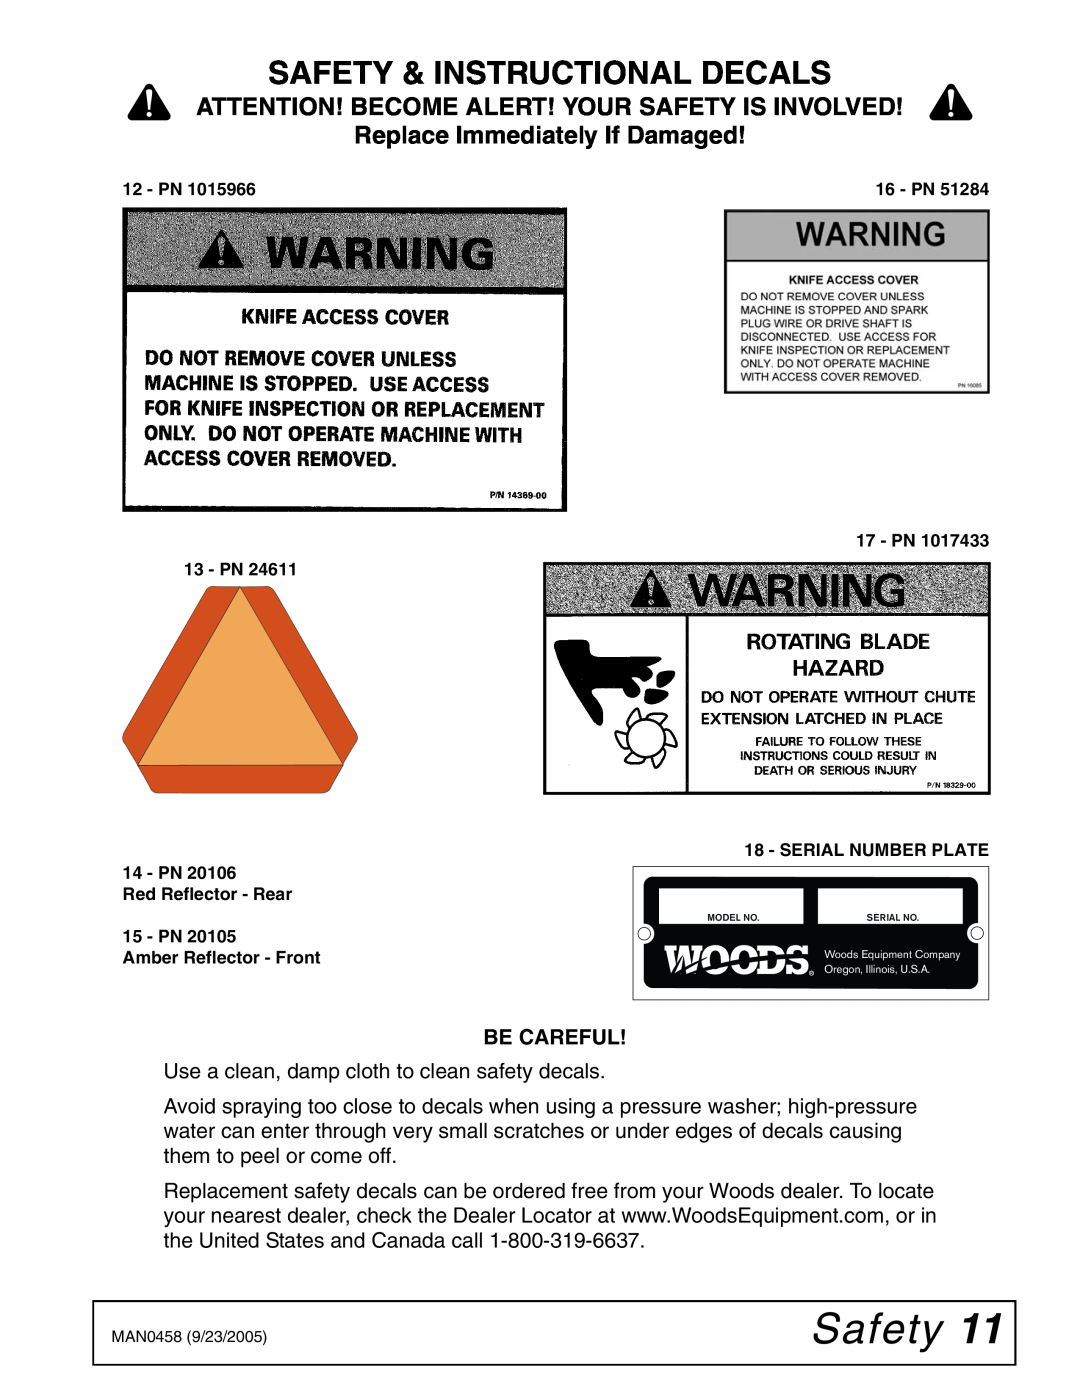 Woods Equipment TCH4500 Be Careful, Safety & Instructional Decals, Attention! Become Alert! Your Safety Is Involved 